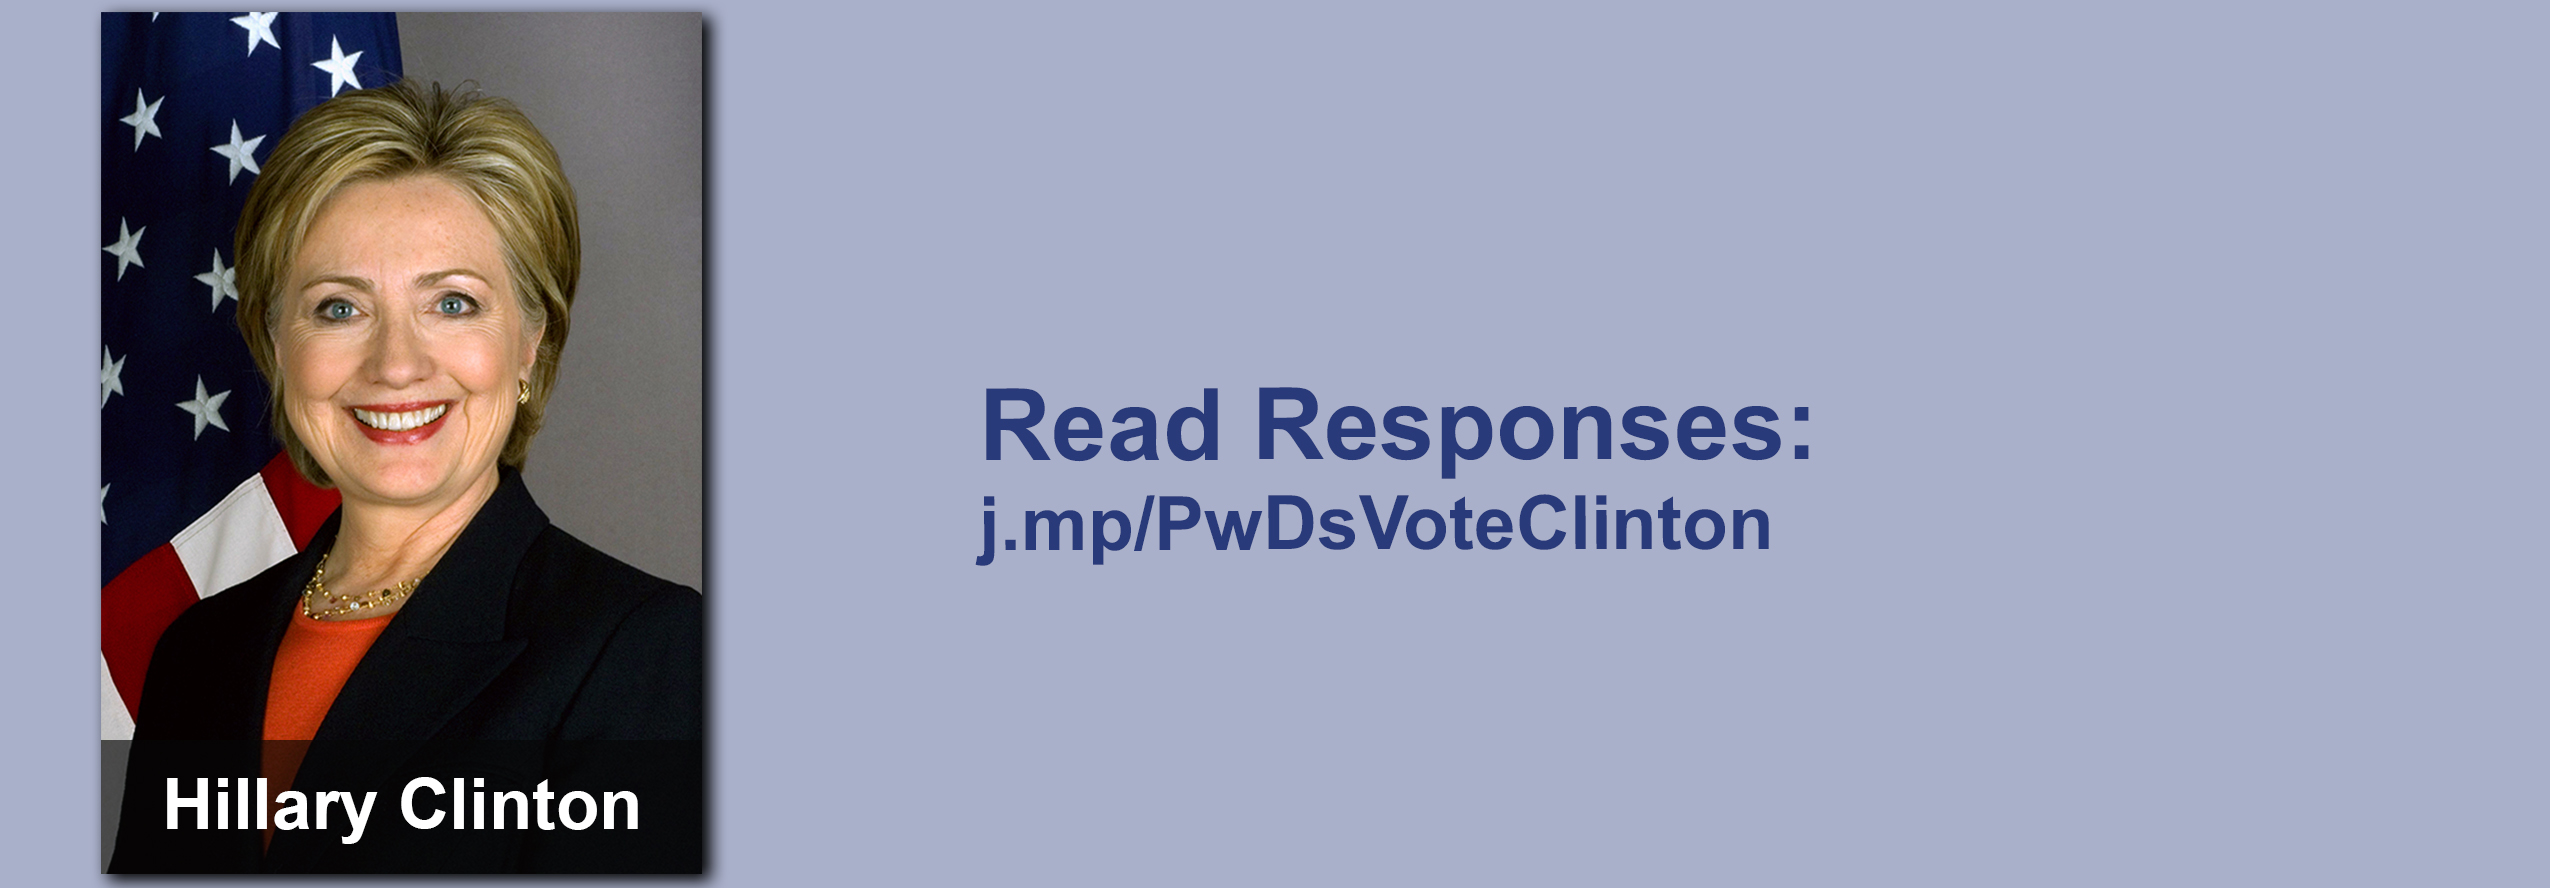 Click on the image to view all of Hillary Clinton's answers to the questionnaire.